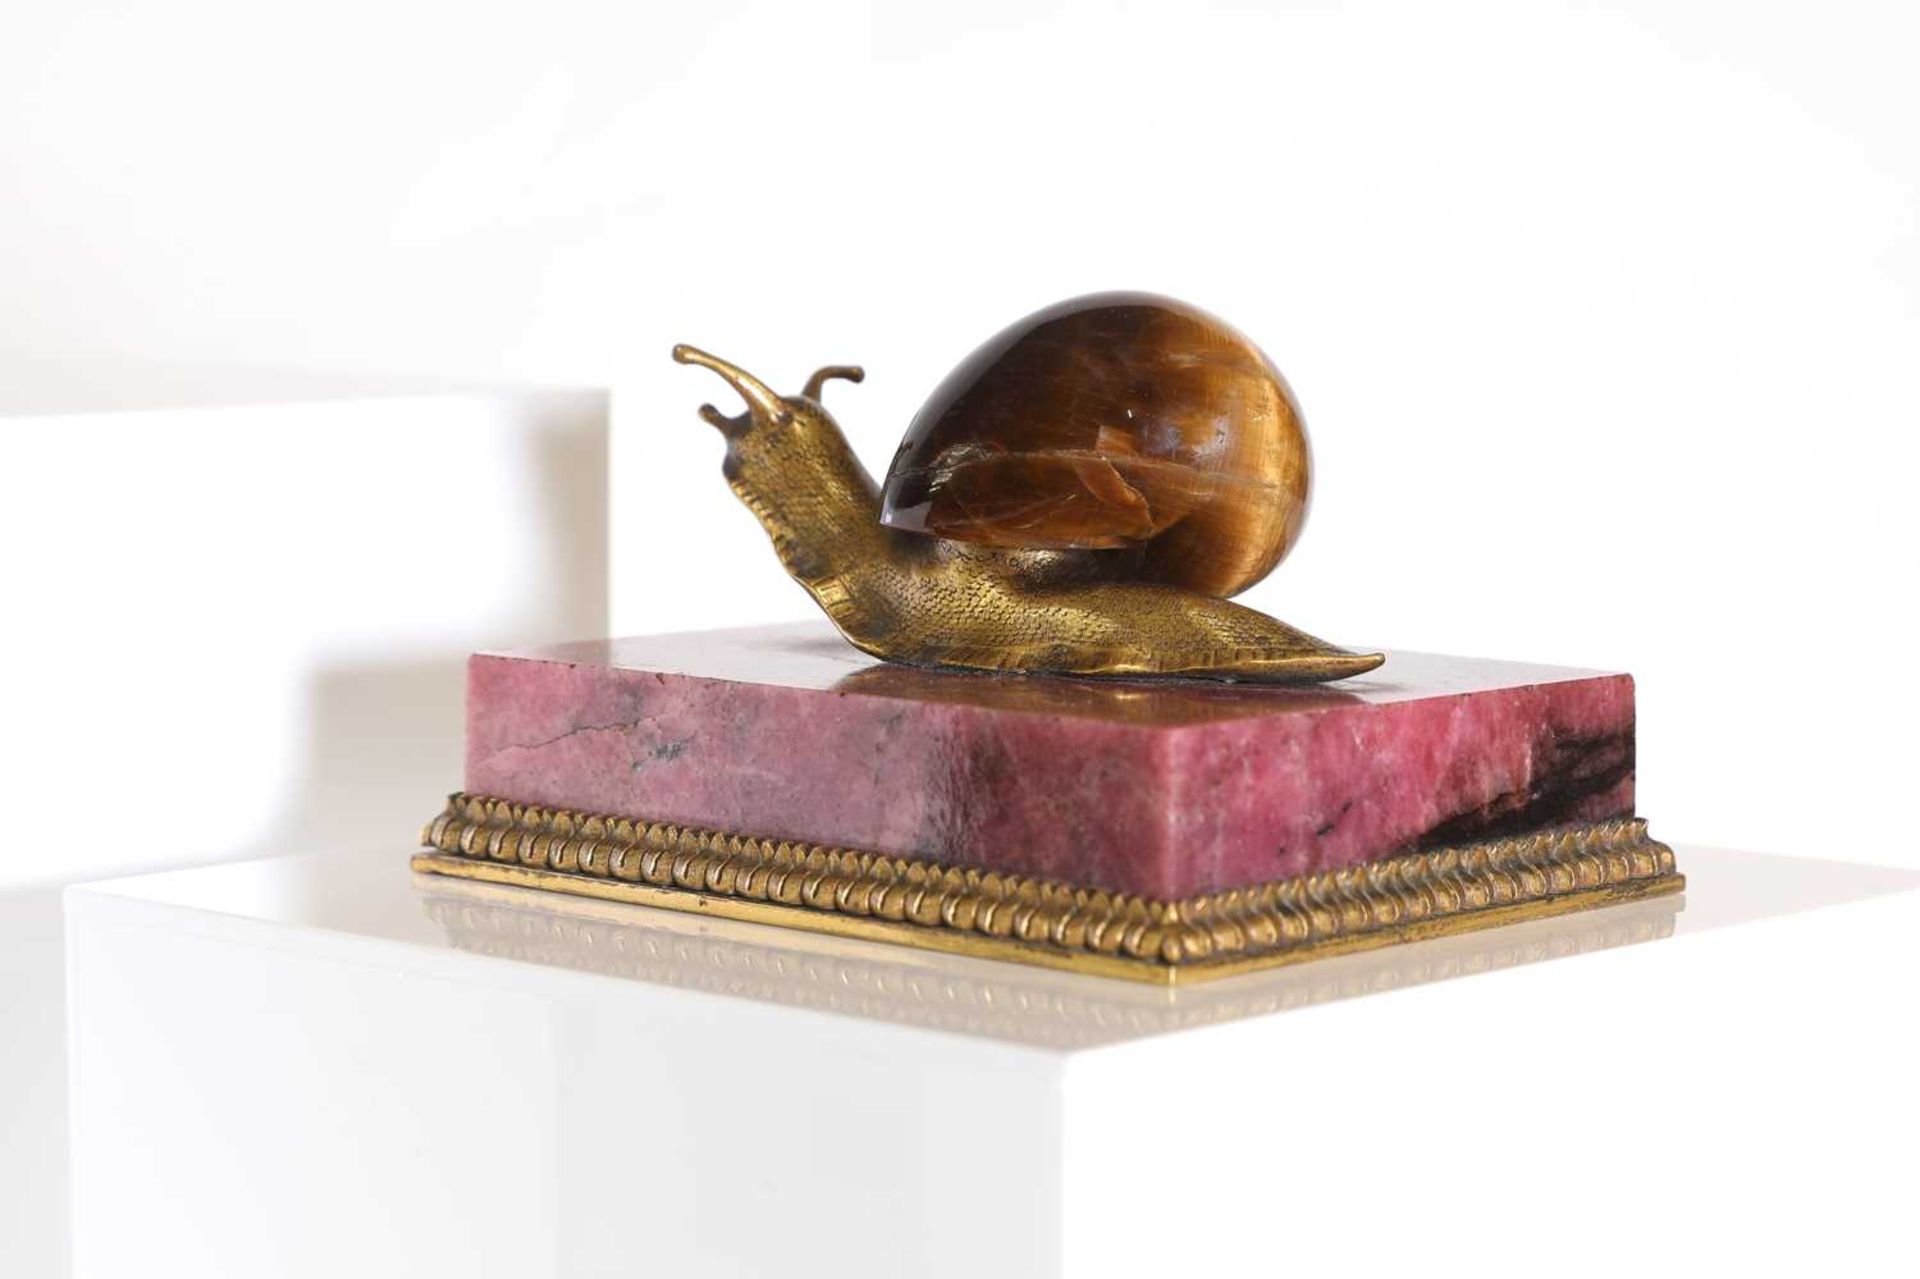 A tiger's eye and ormolu snail, - Image 4 of 25